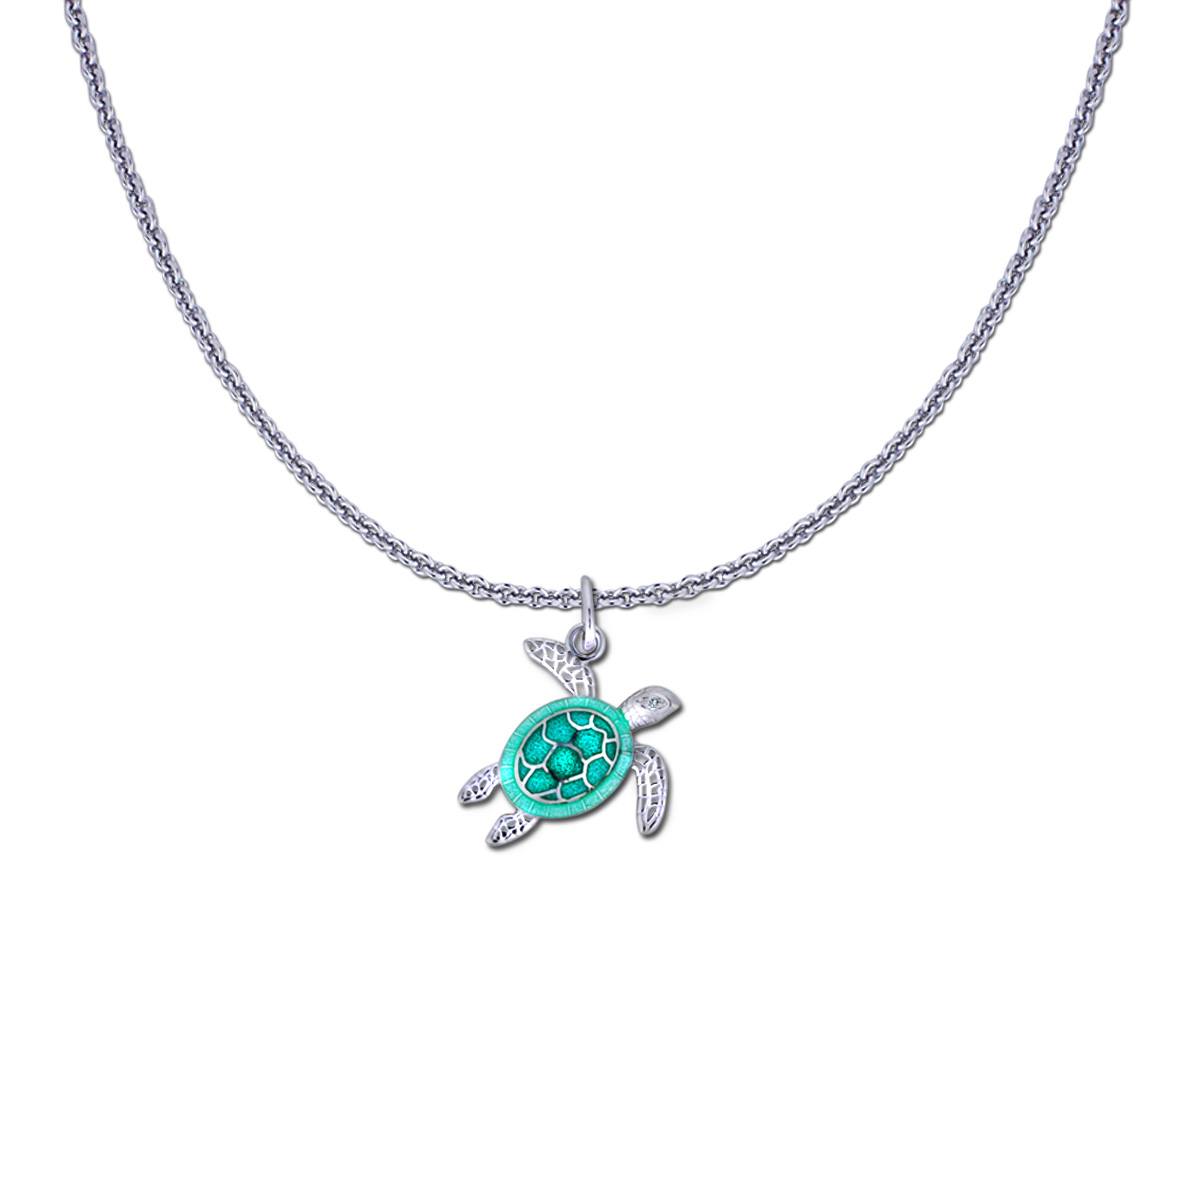 Petite Sea Turtle on a Sterling Silver Link Chain